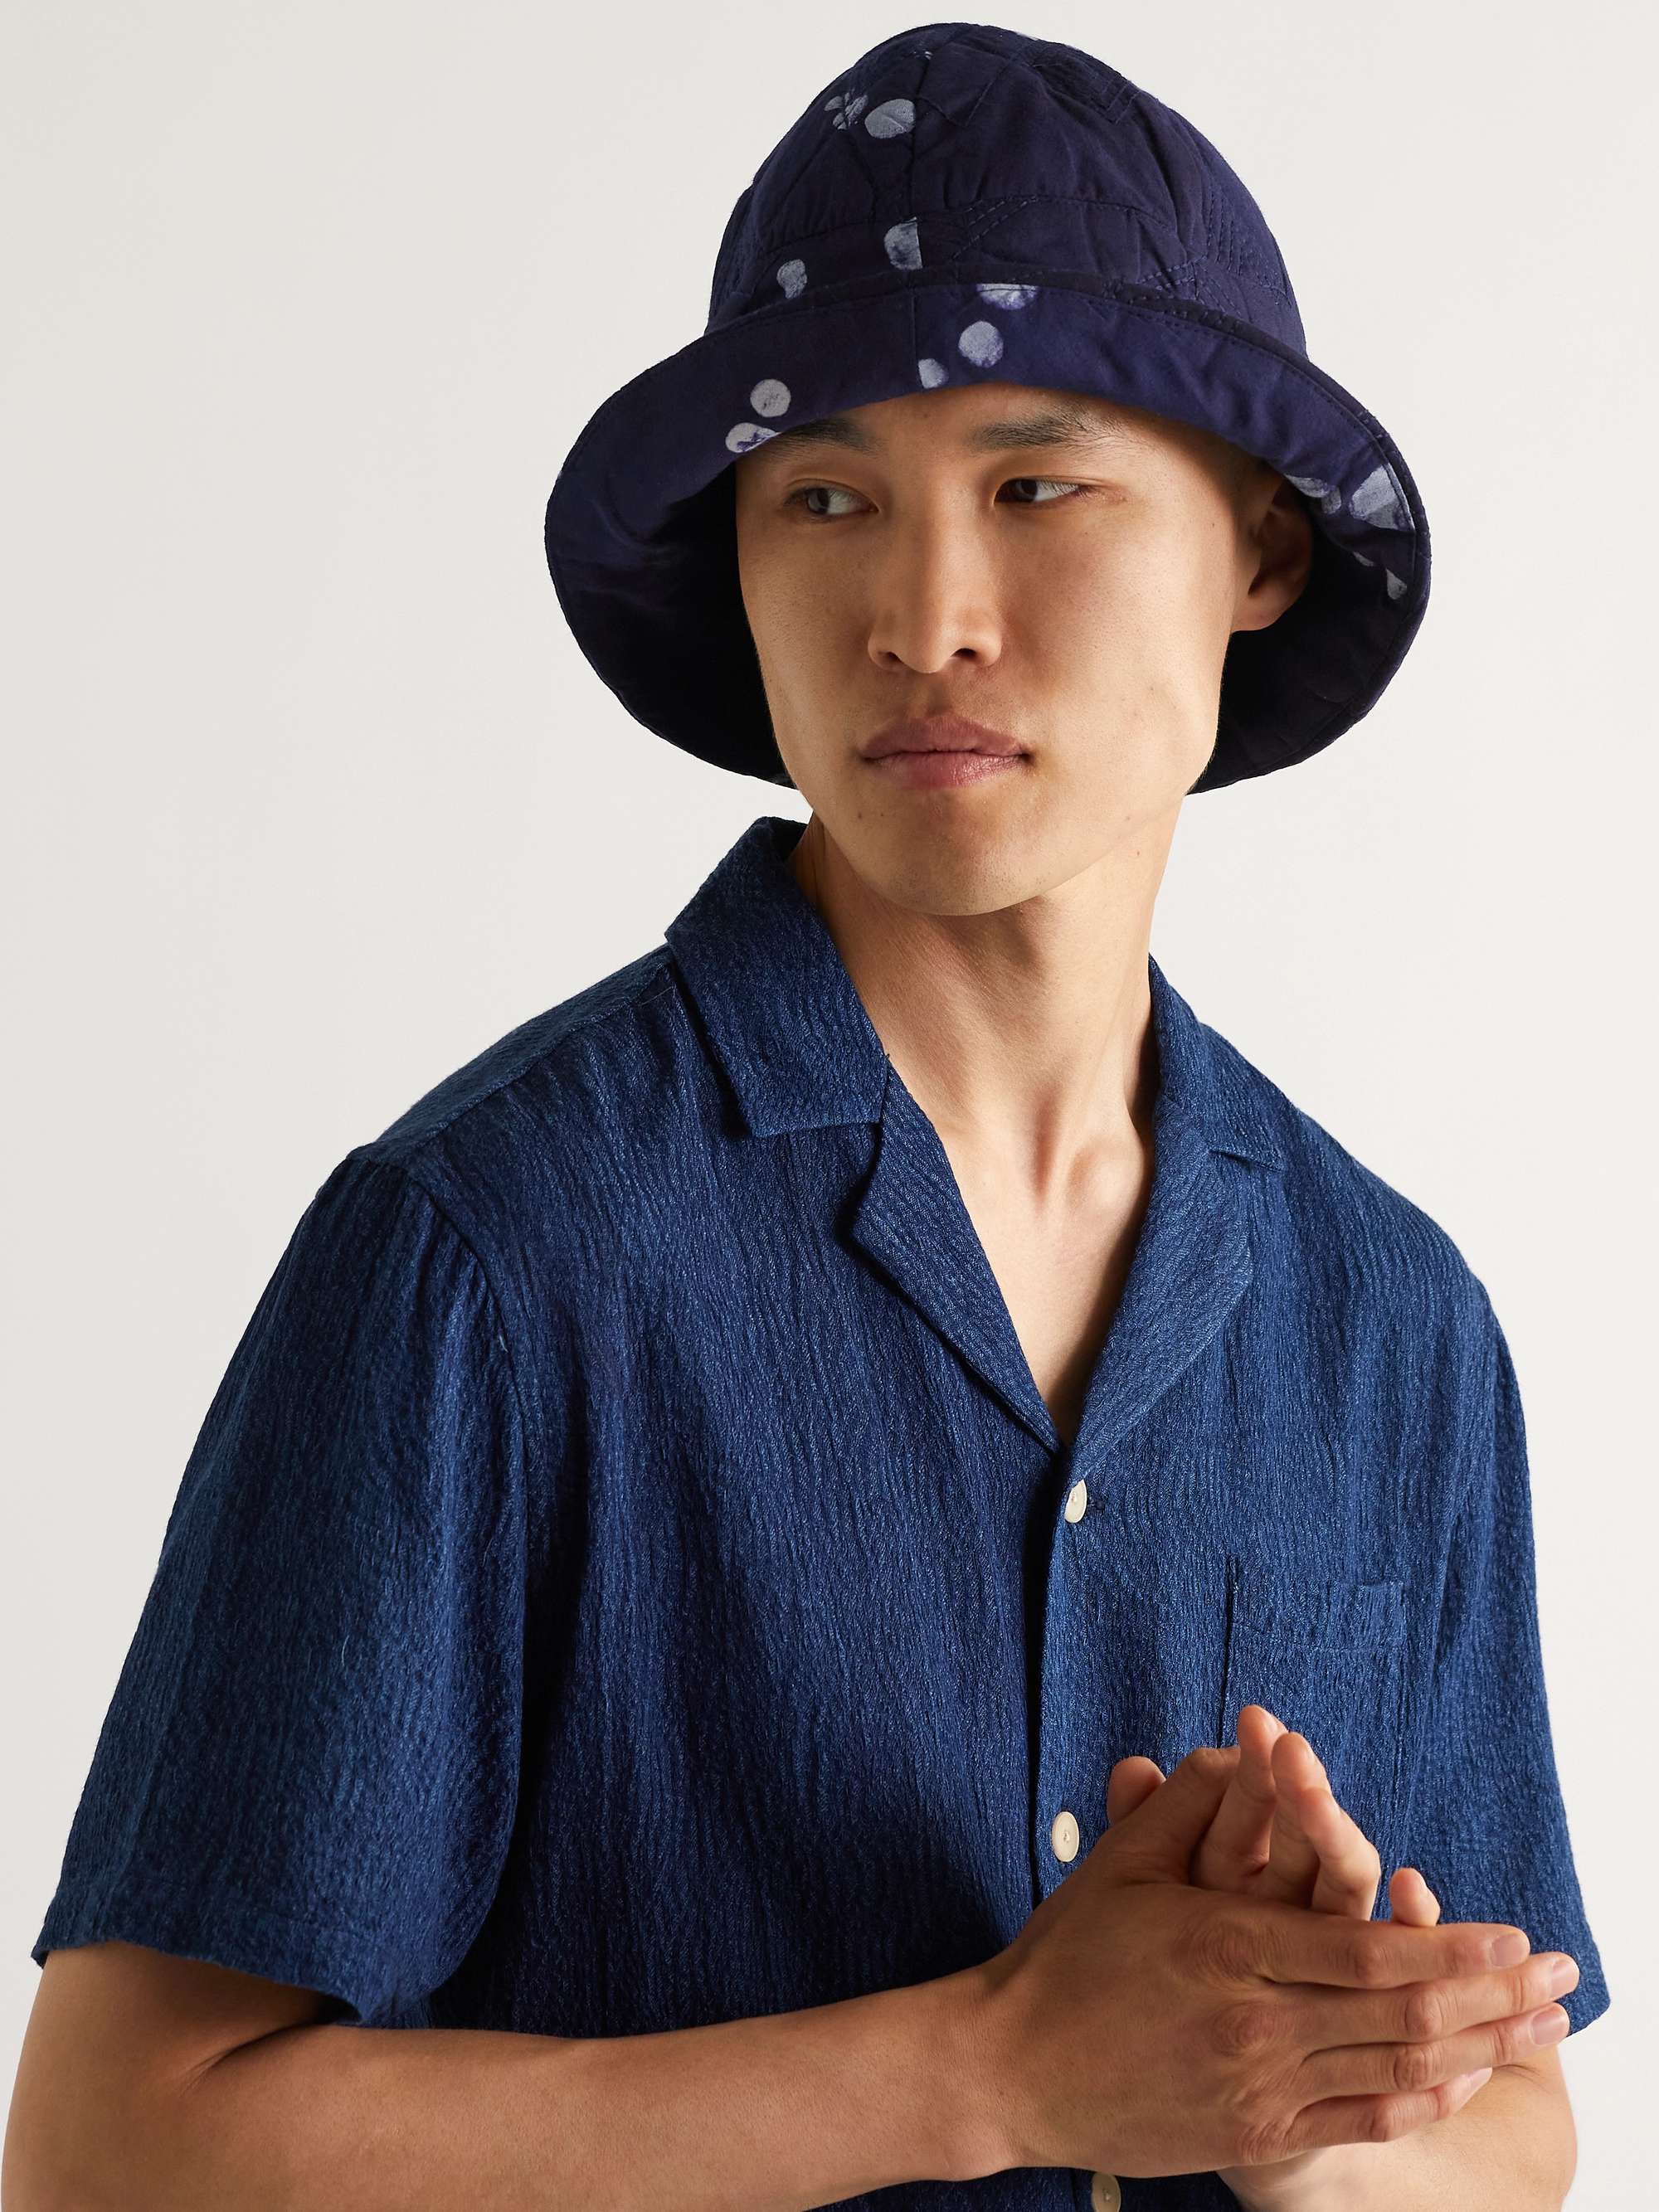 POST-IMPERIAL Hand-Dyed Quilted Cotton Bucket Hat